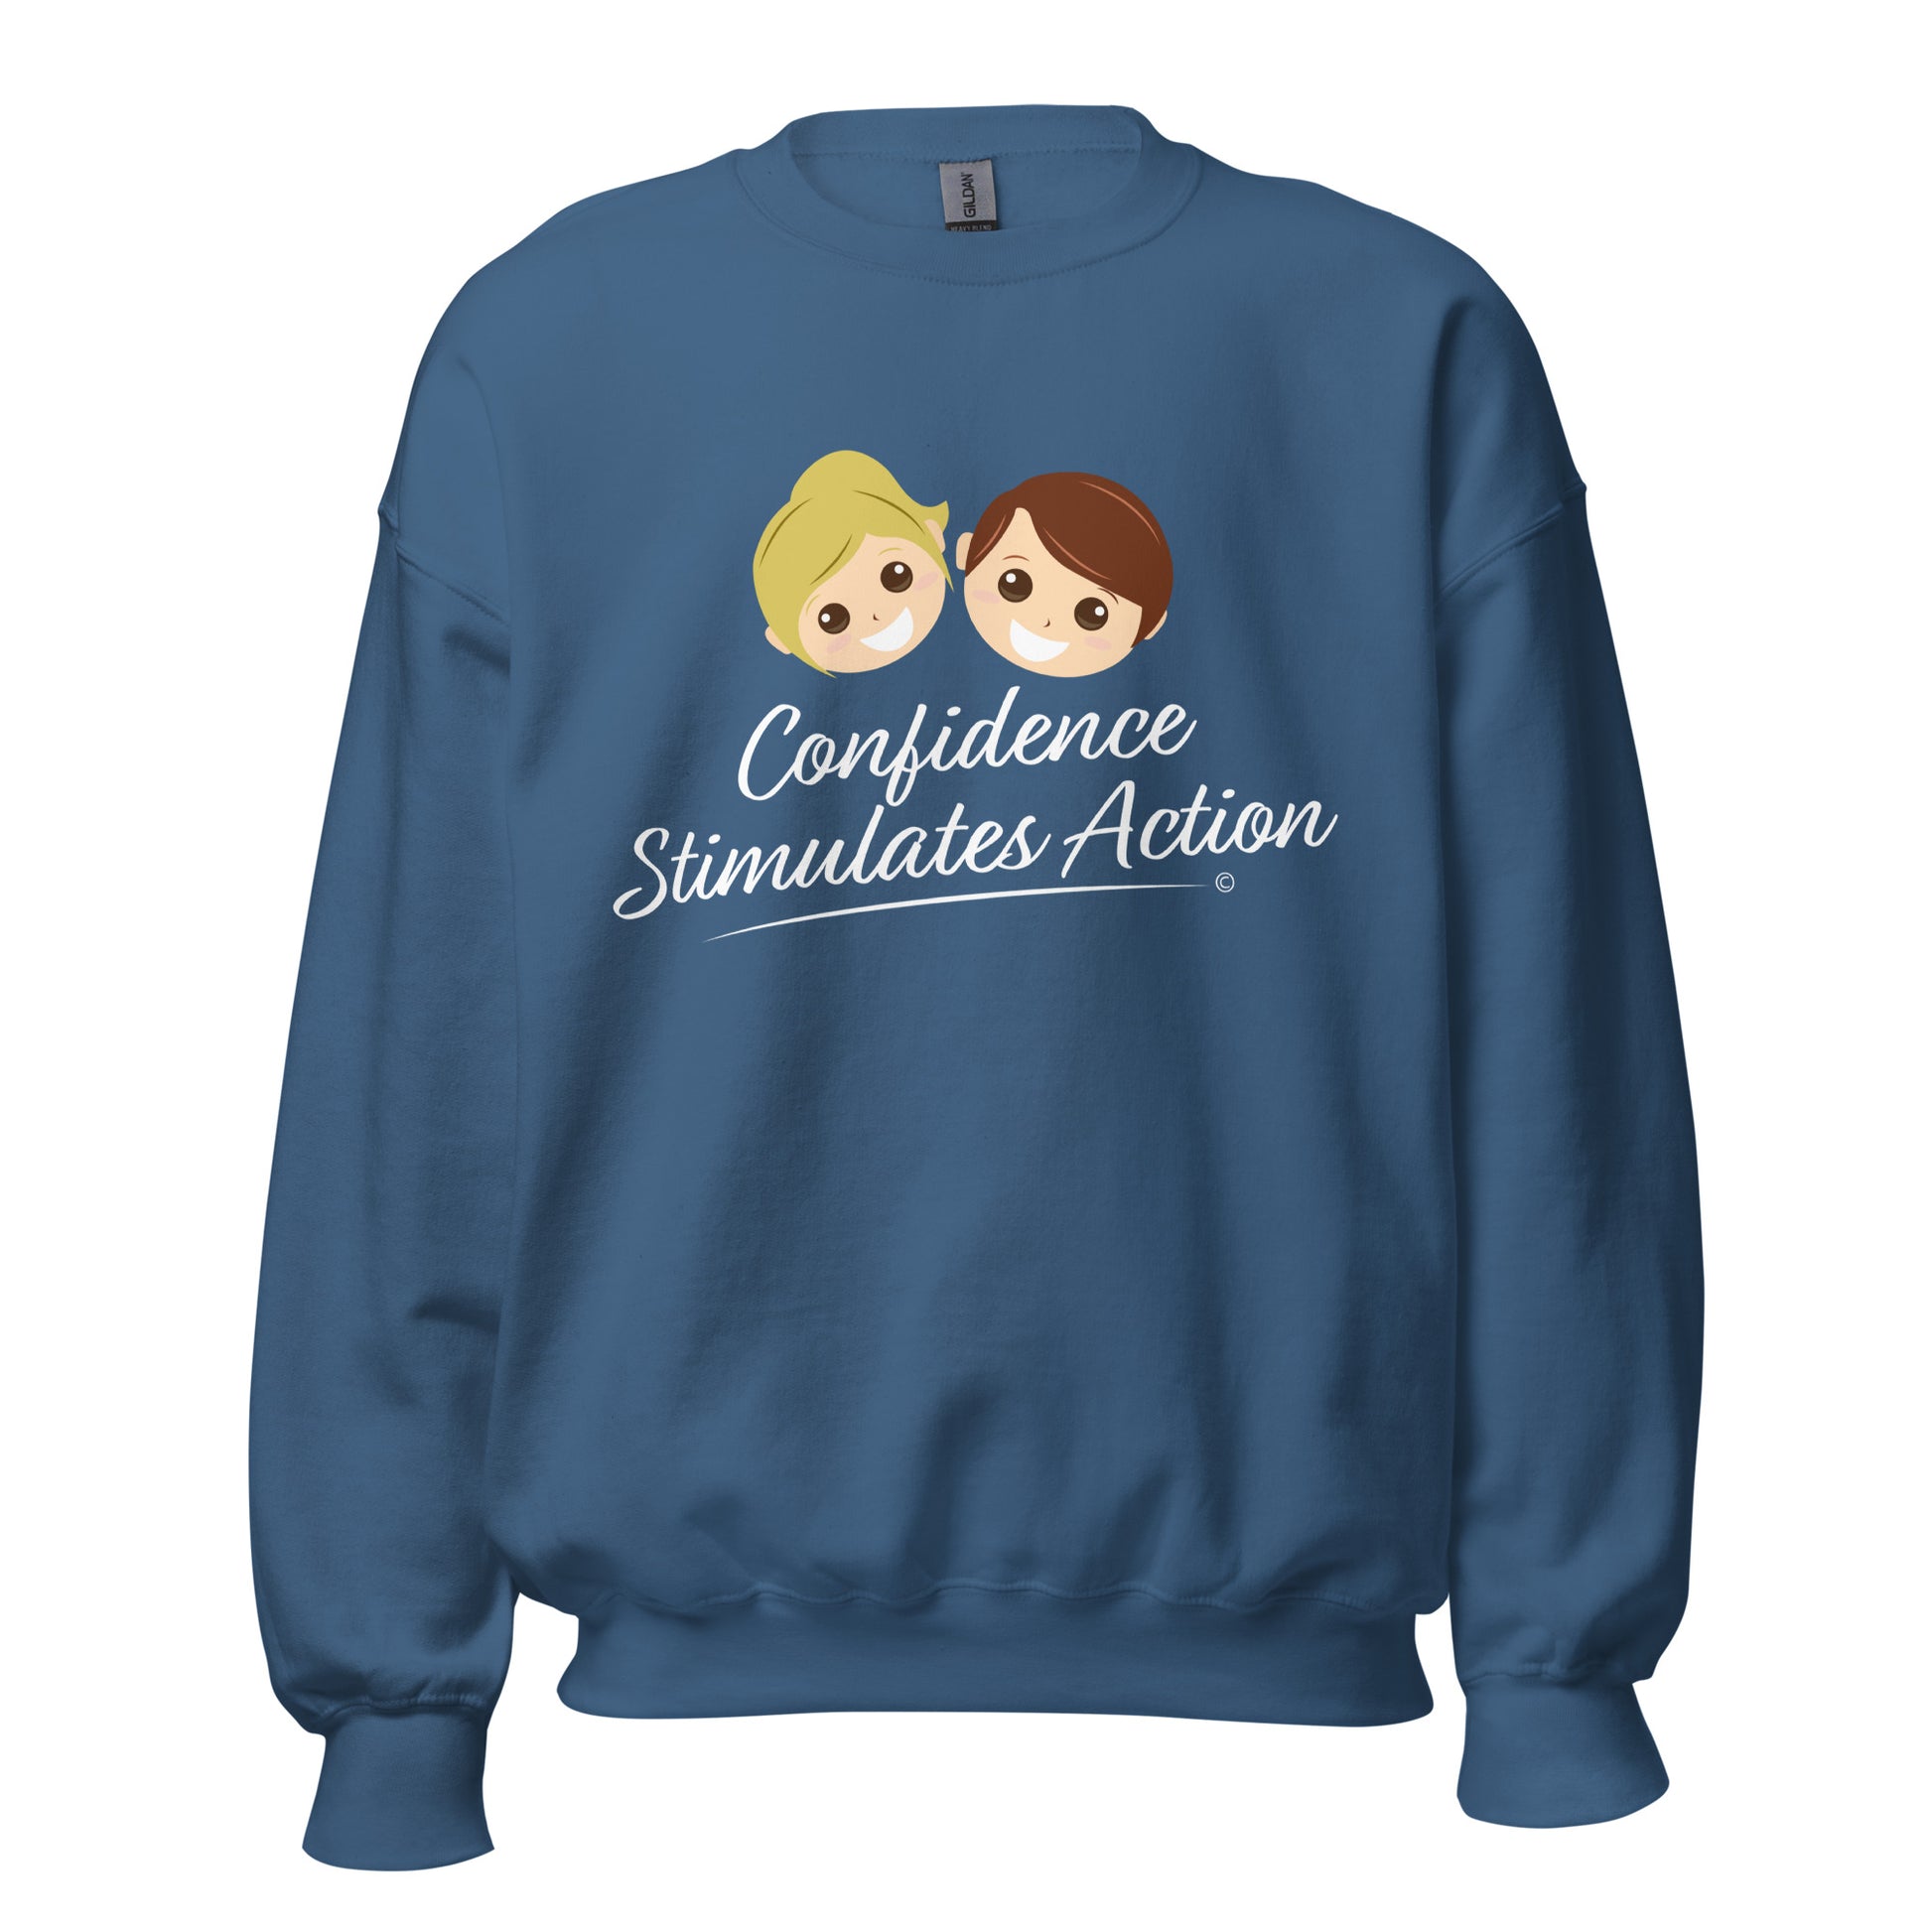 Sweatshirts for wilderness and camping -Indigo Blue